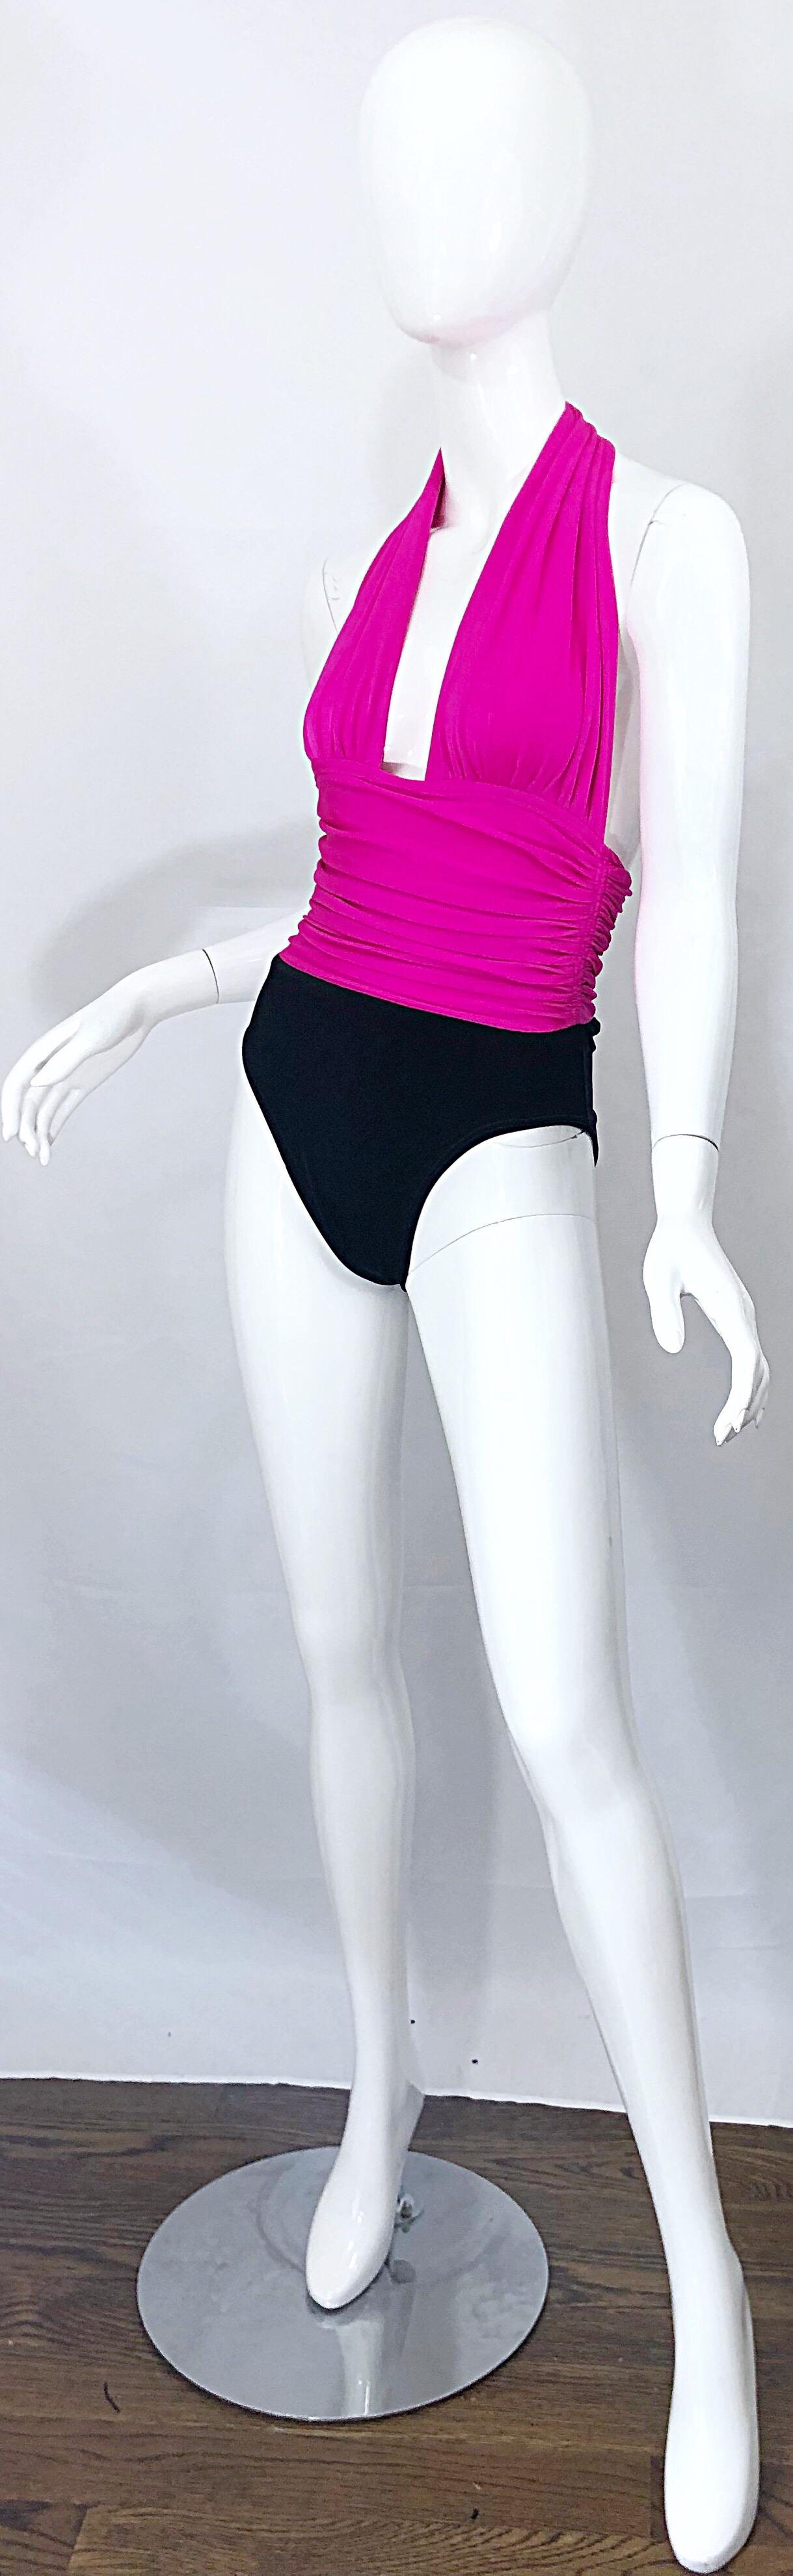 Yves Saint Laurent Size 12 / 14 Vintage Sexy Hot Pink + Black One Piece Swimsuit In Excellent Condition For Sale In San Diego, CA